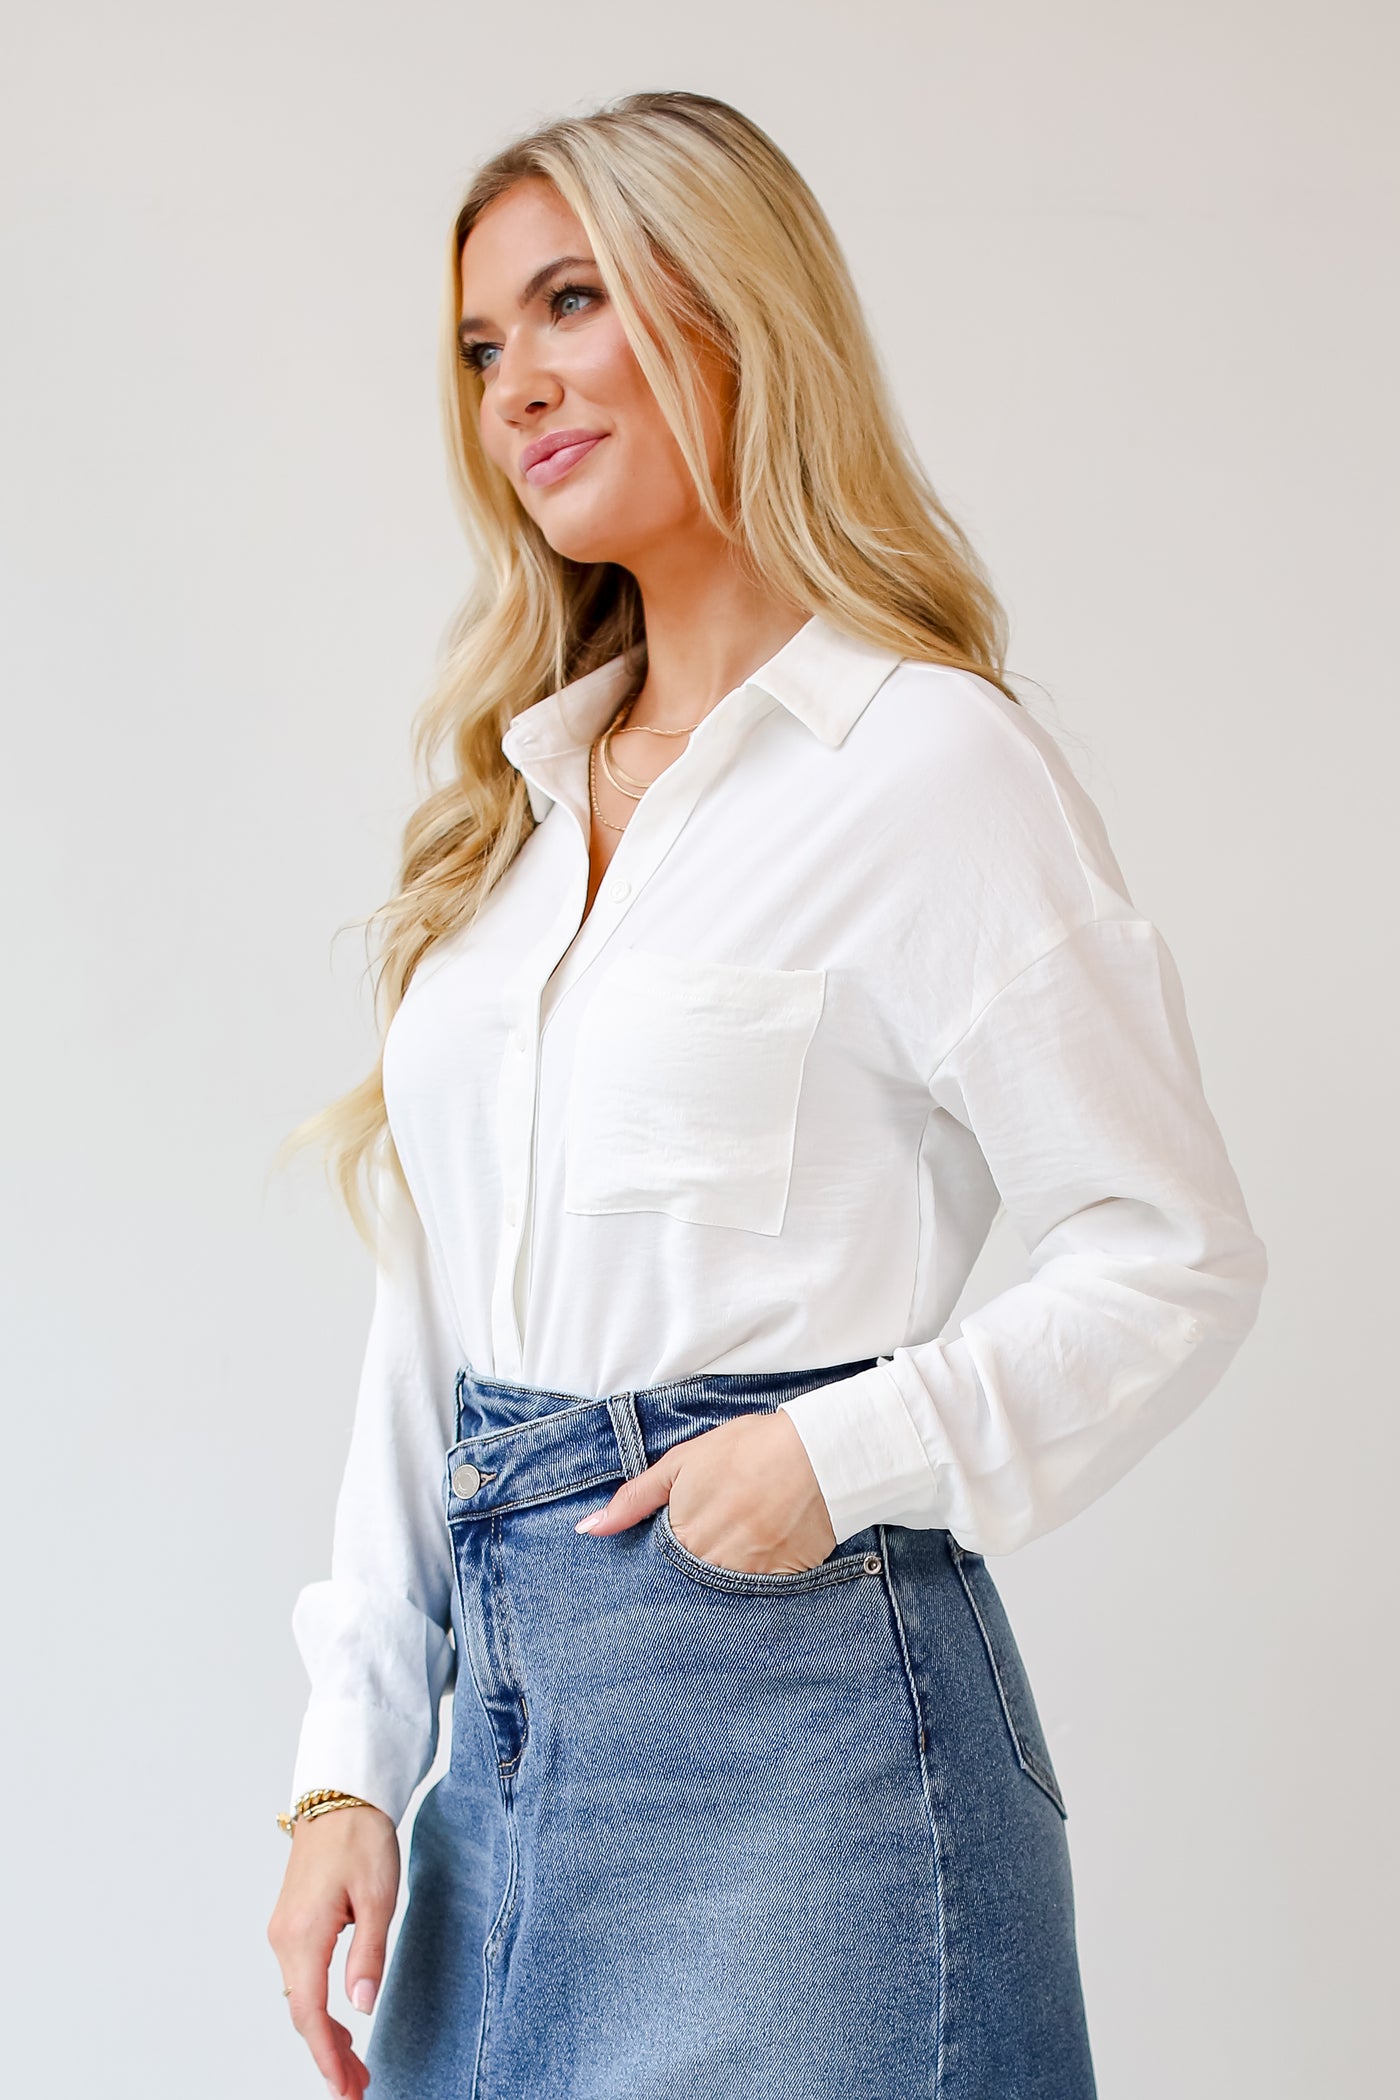 white Button-Up Blouse side view